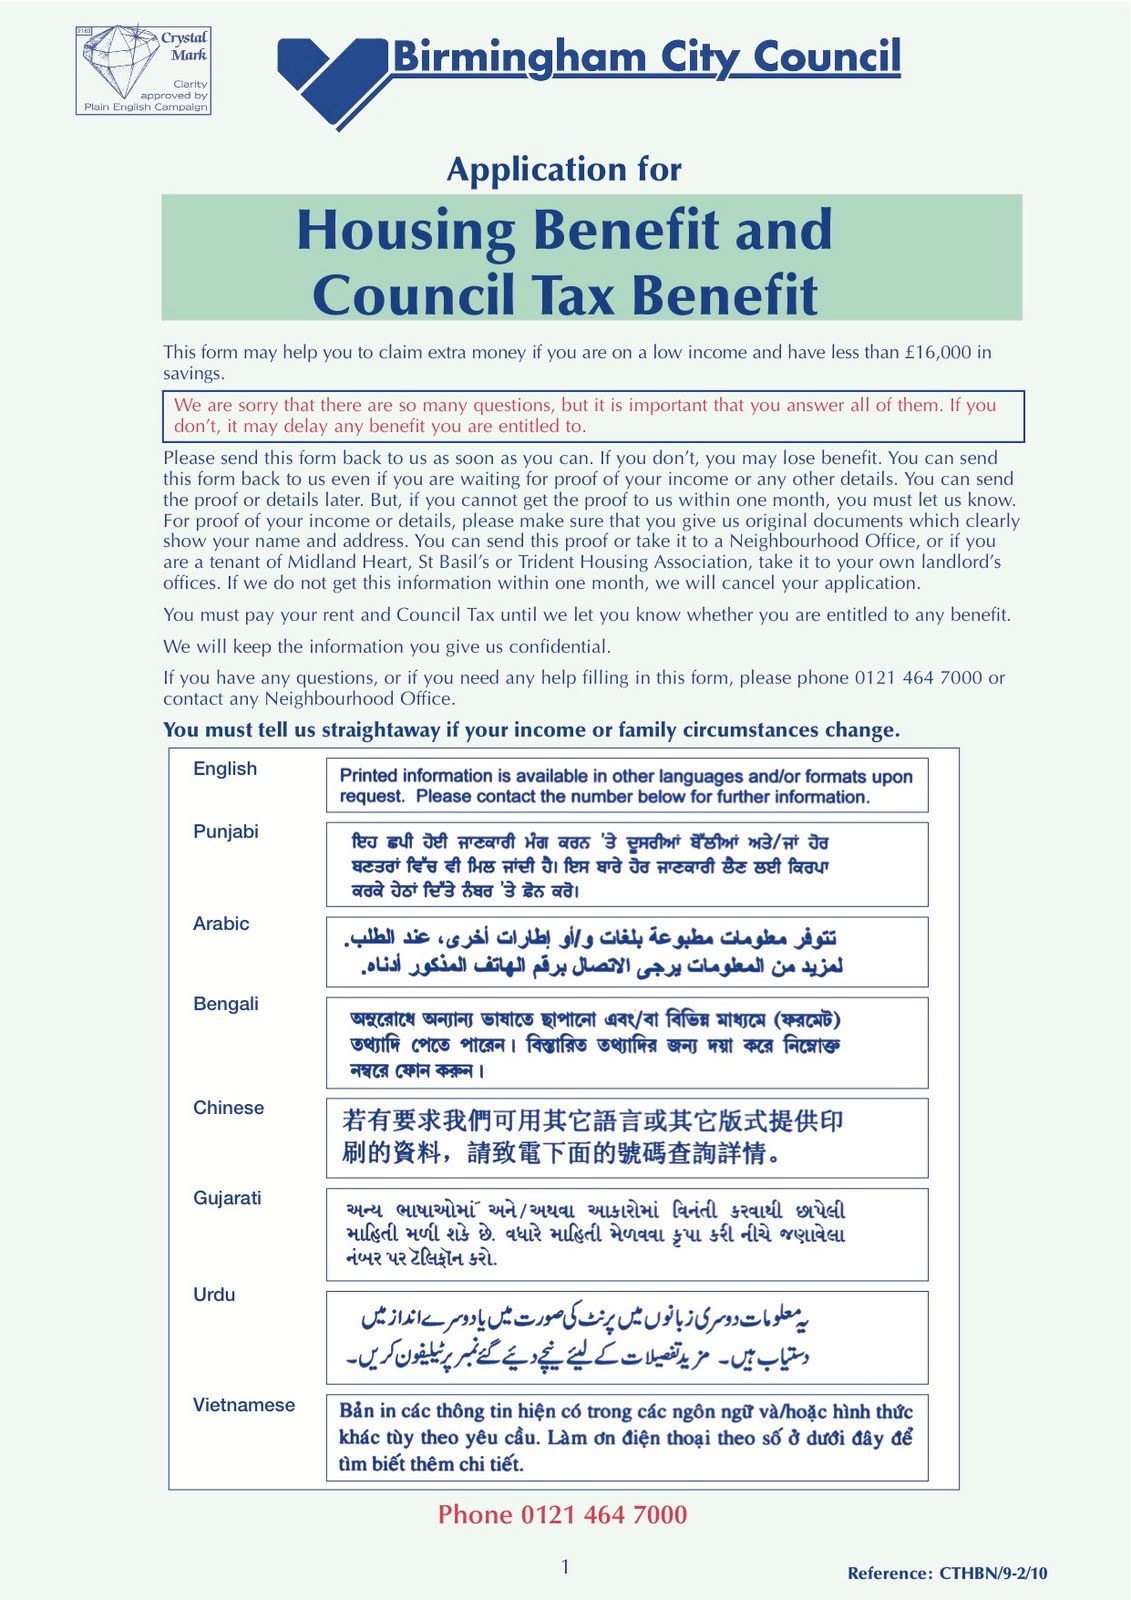 Housing+Benefit+and+Council+Tax+Benefit+Form.jpg